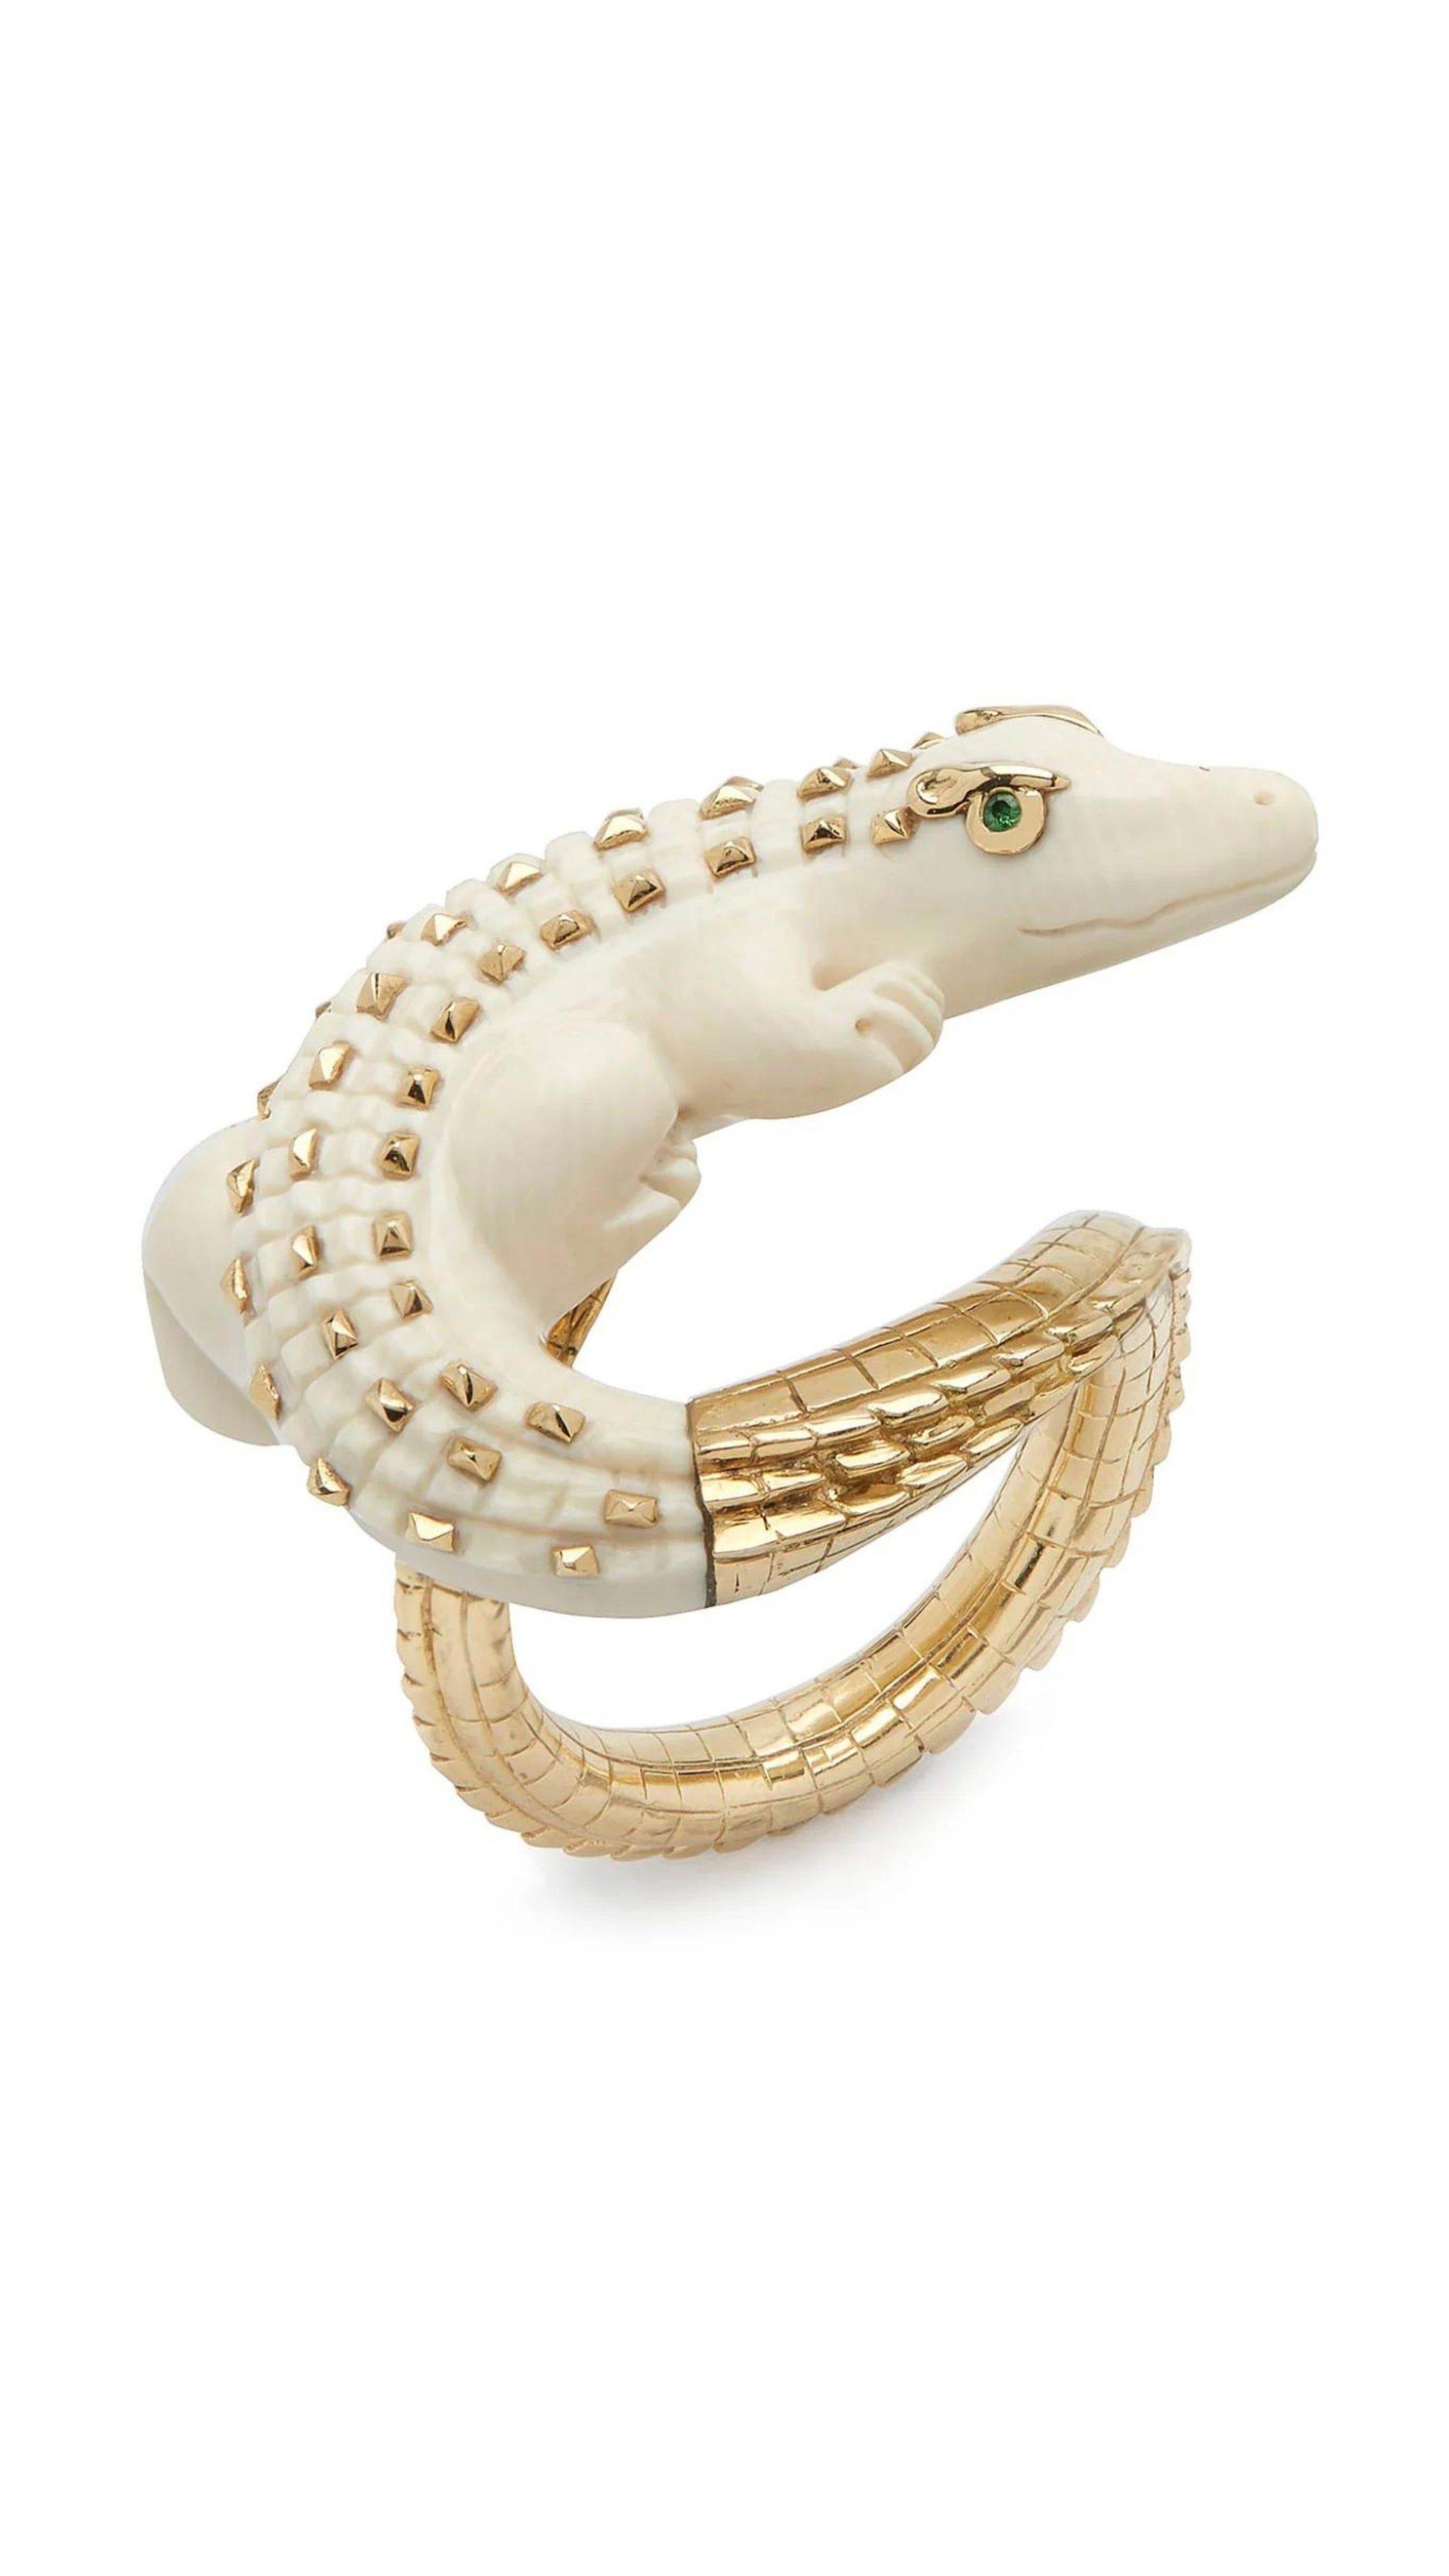 Bibi van der Velden Mammoth Alligator Twist Ring. Crafted in mamoth tusk in the shape of an alligator that curves around the finger. The tail is made from 18K gold and the ivory body has 18K gold studs. The ring is shown from the side.